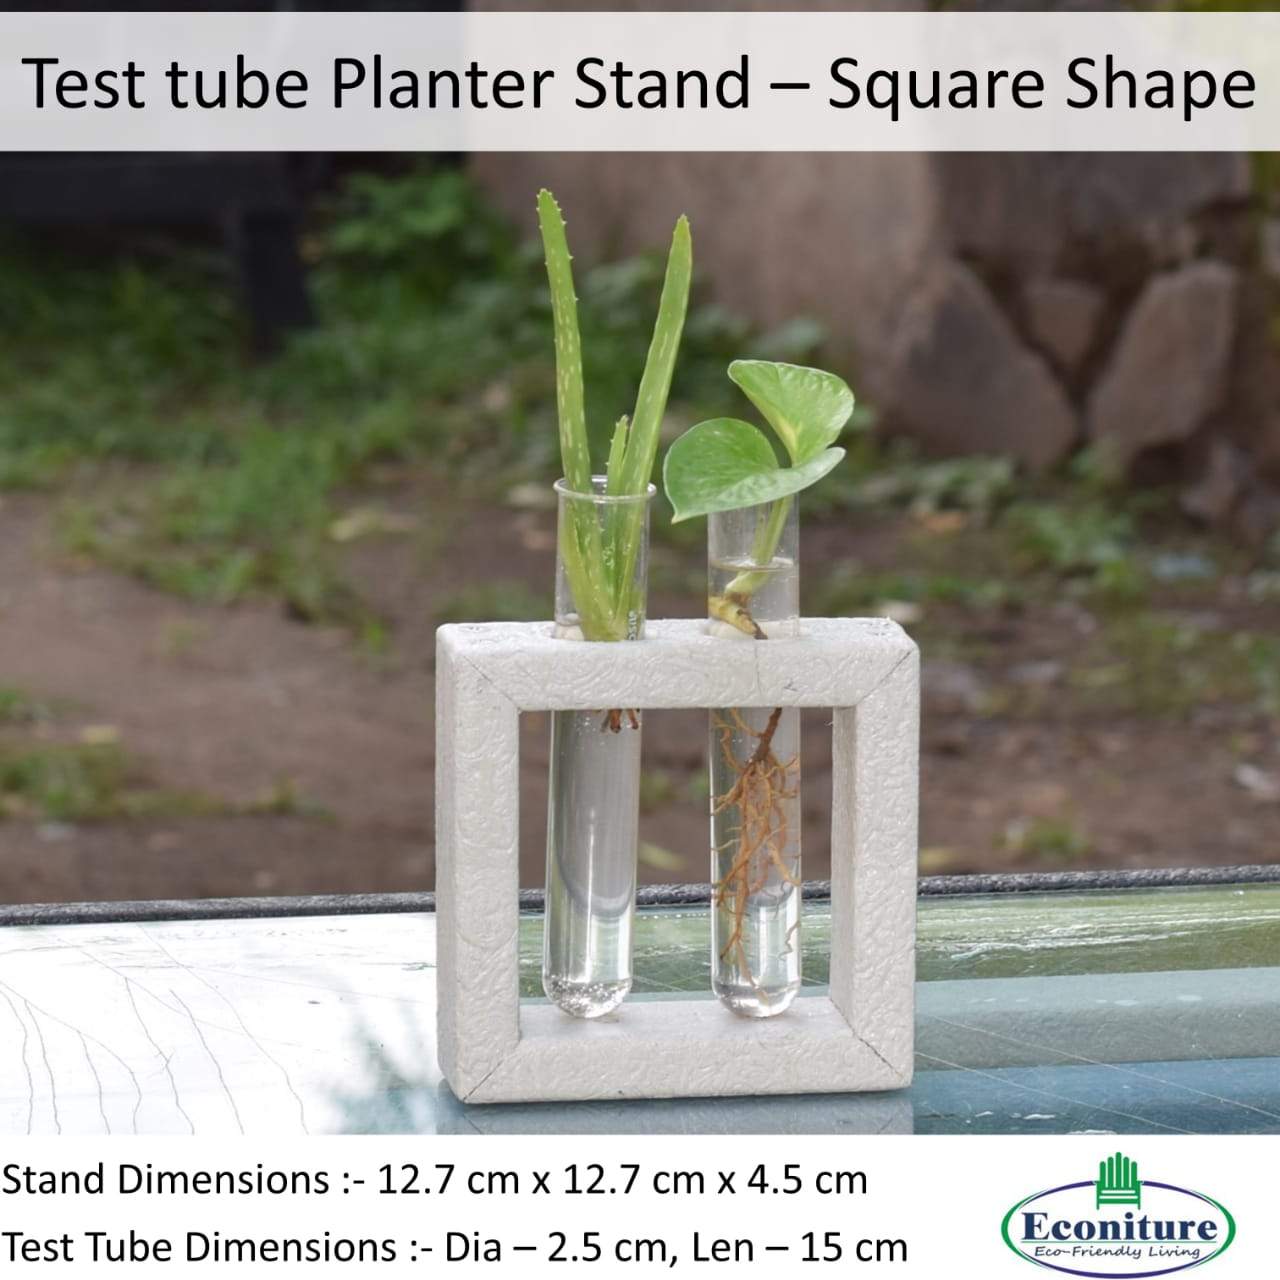 Eco Test Tube Planter Square - The Teal Thread